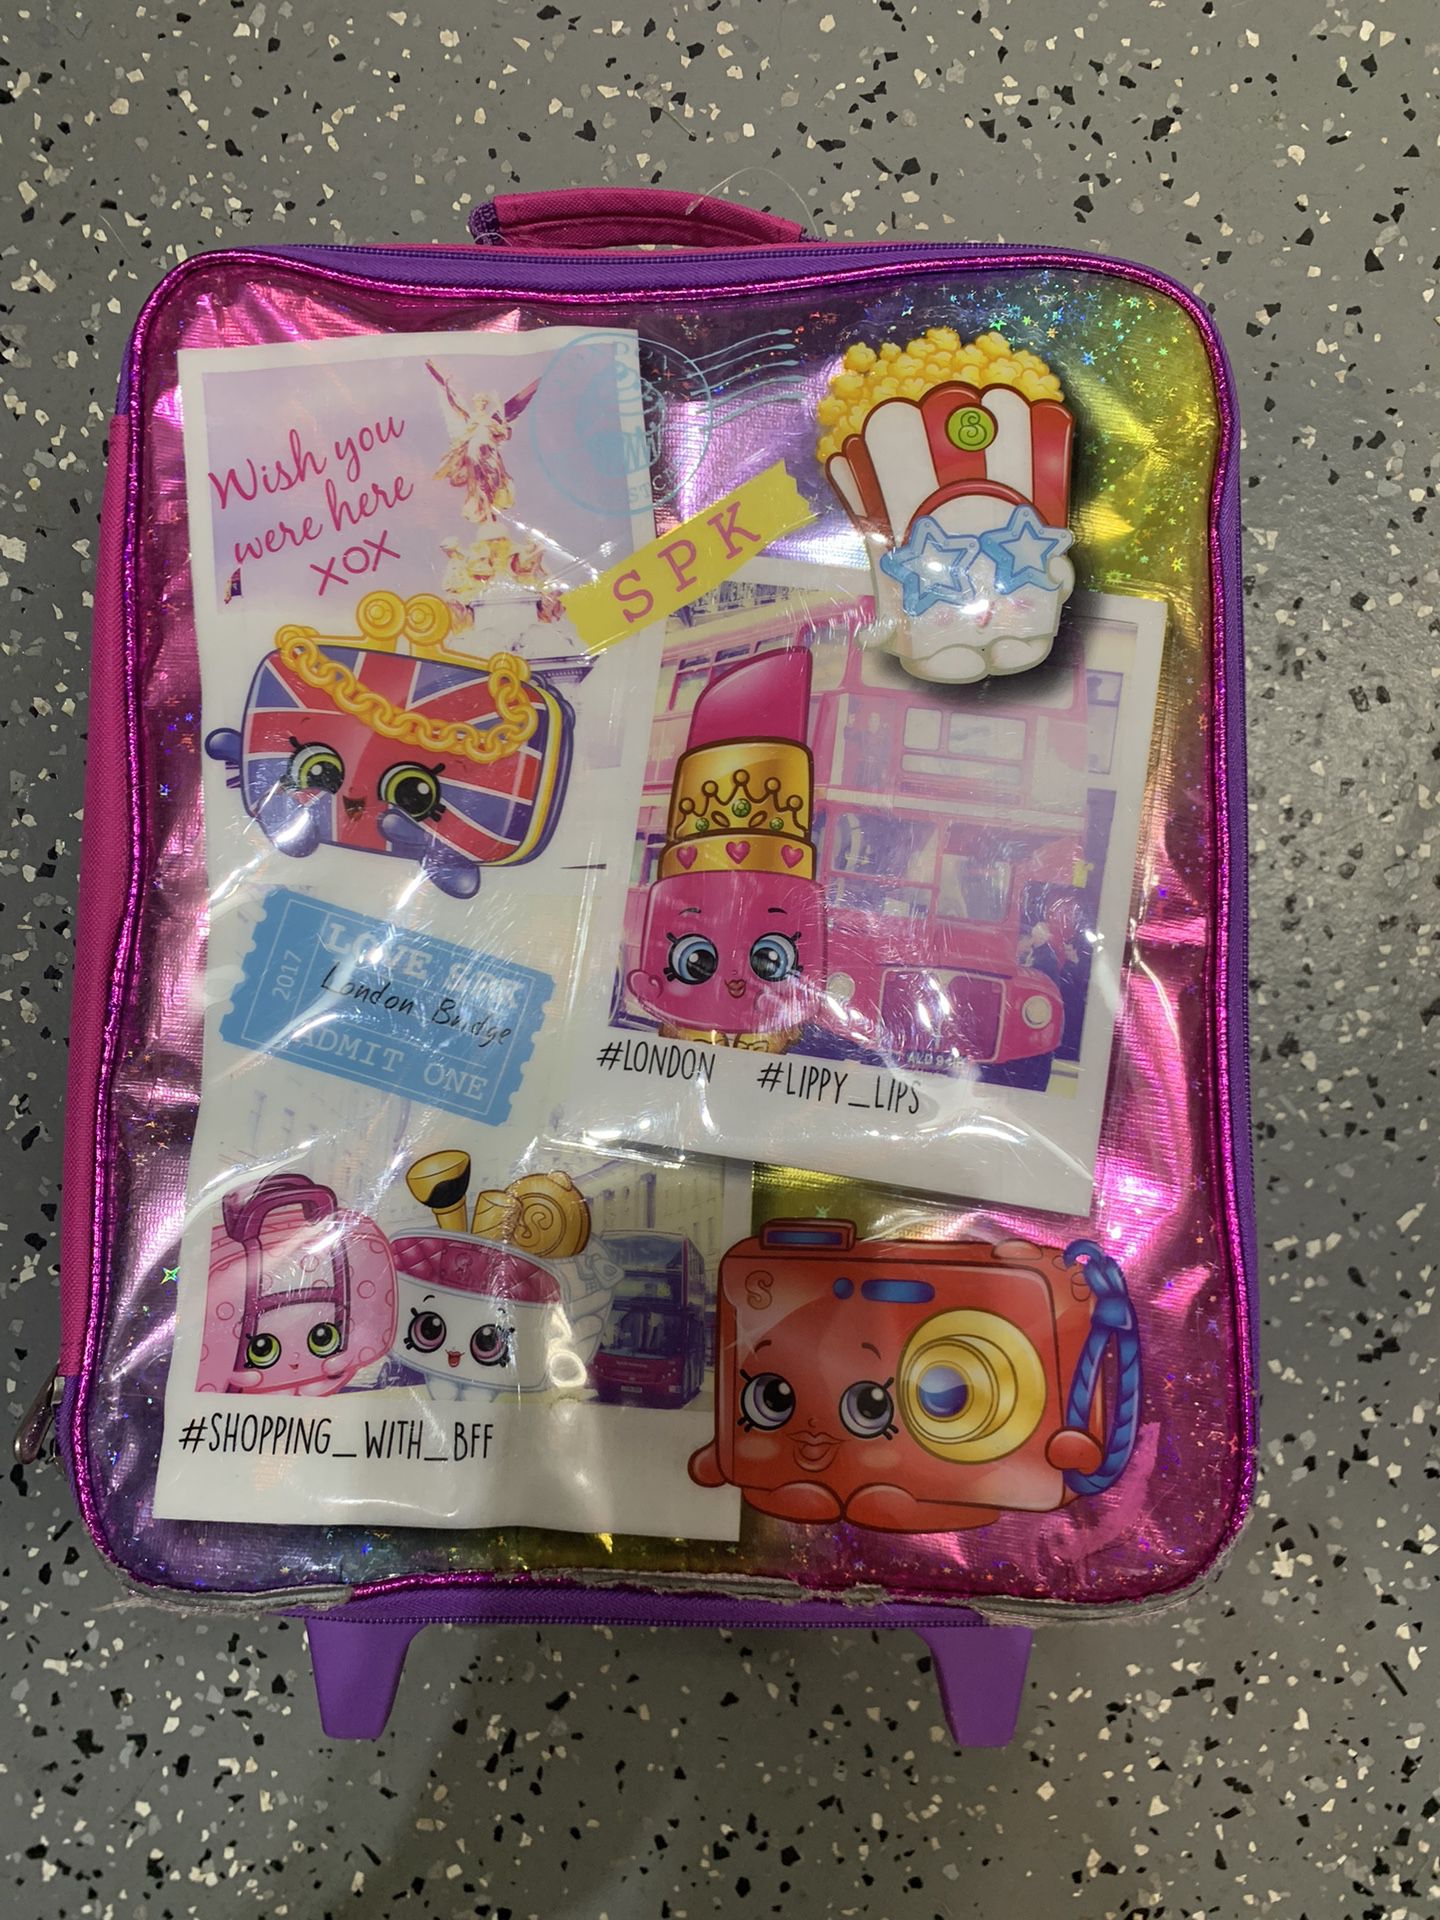 Shopkins kids suitcase damage in photos Coral Springs 33071